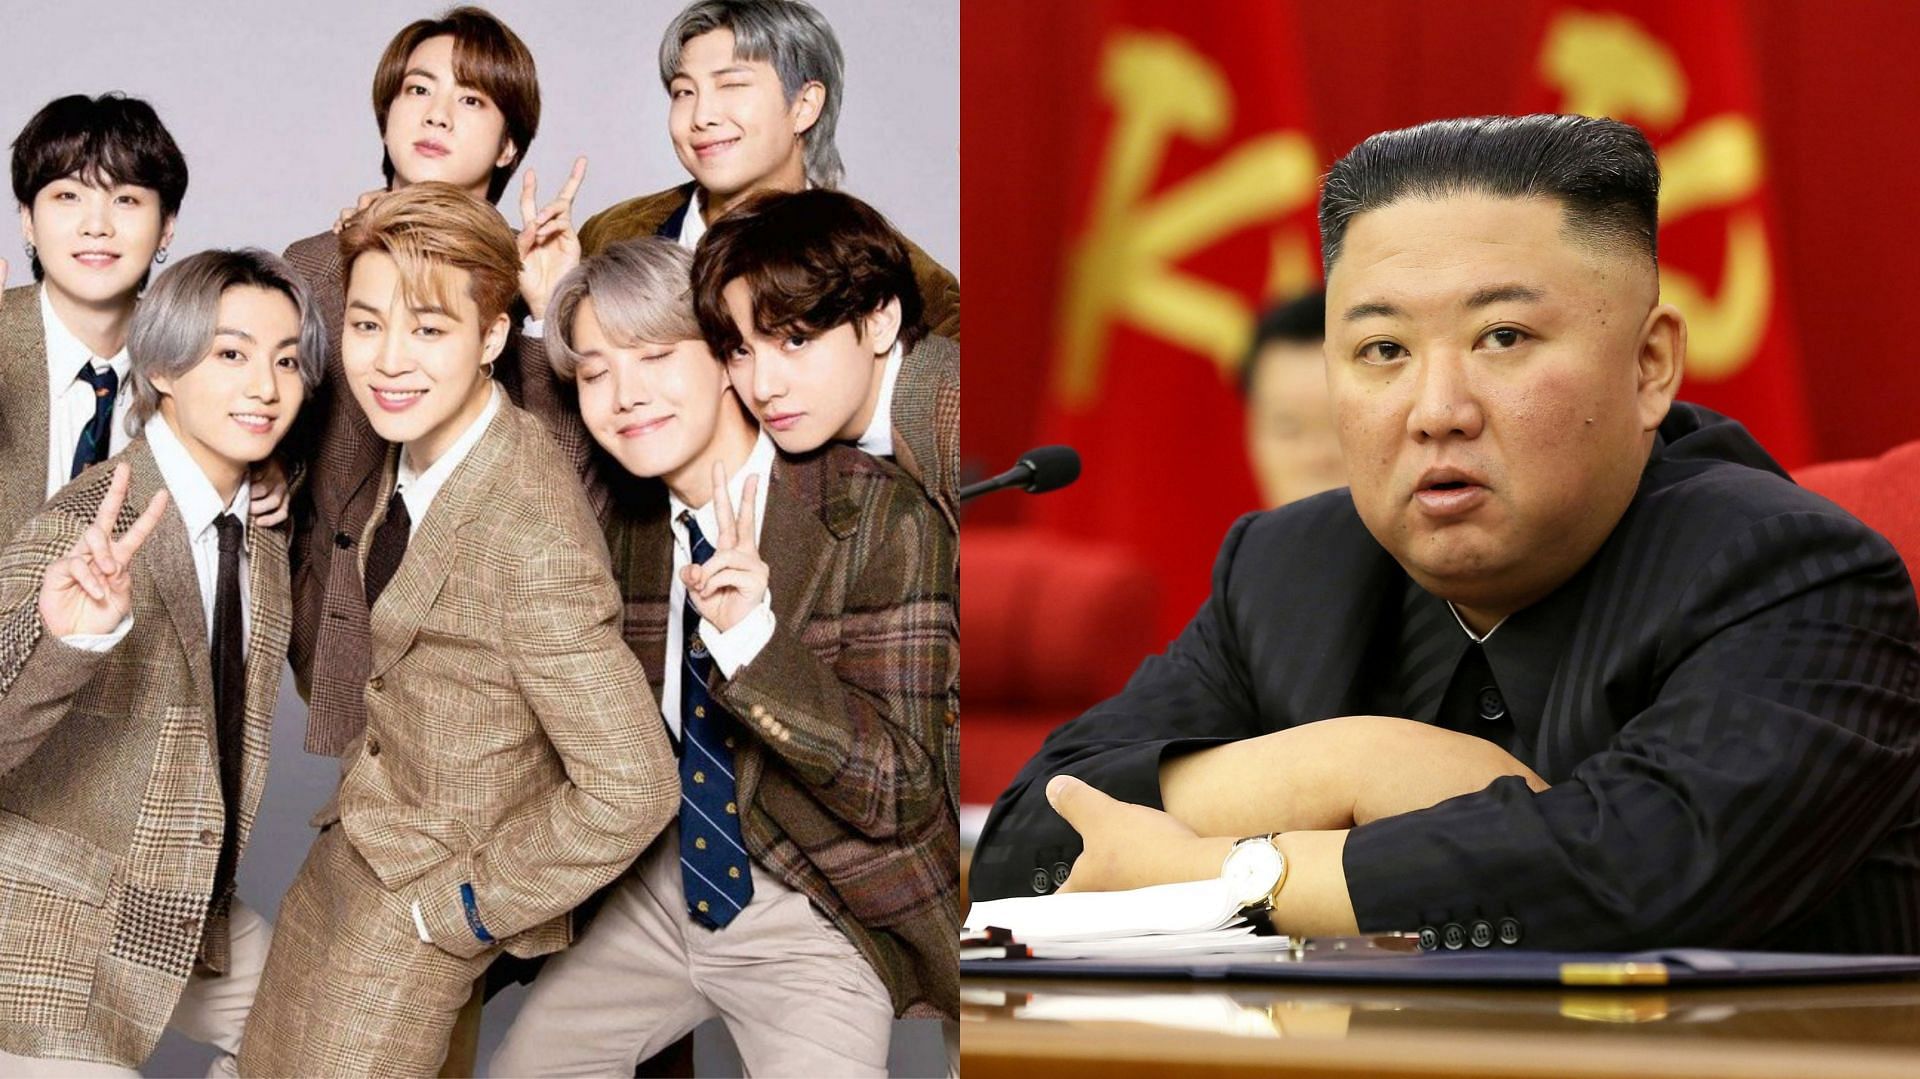 All South Korean media is strictly forbidden in North Korea, including BTS. (Image via Reuters, @bighitentertainment)